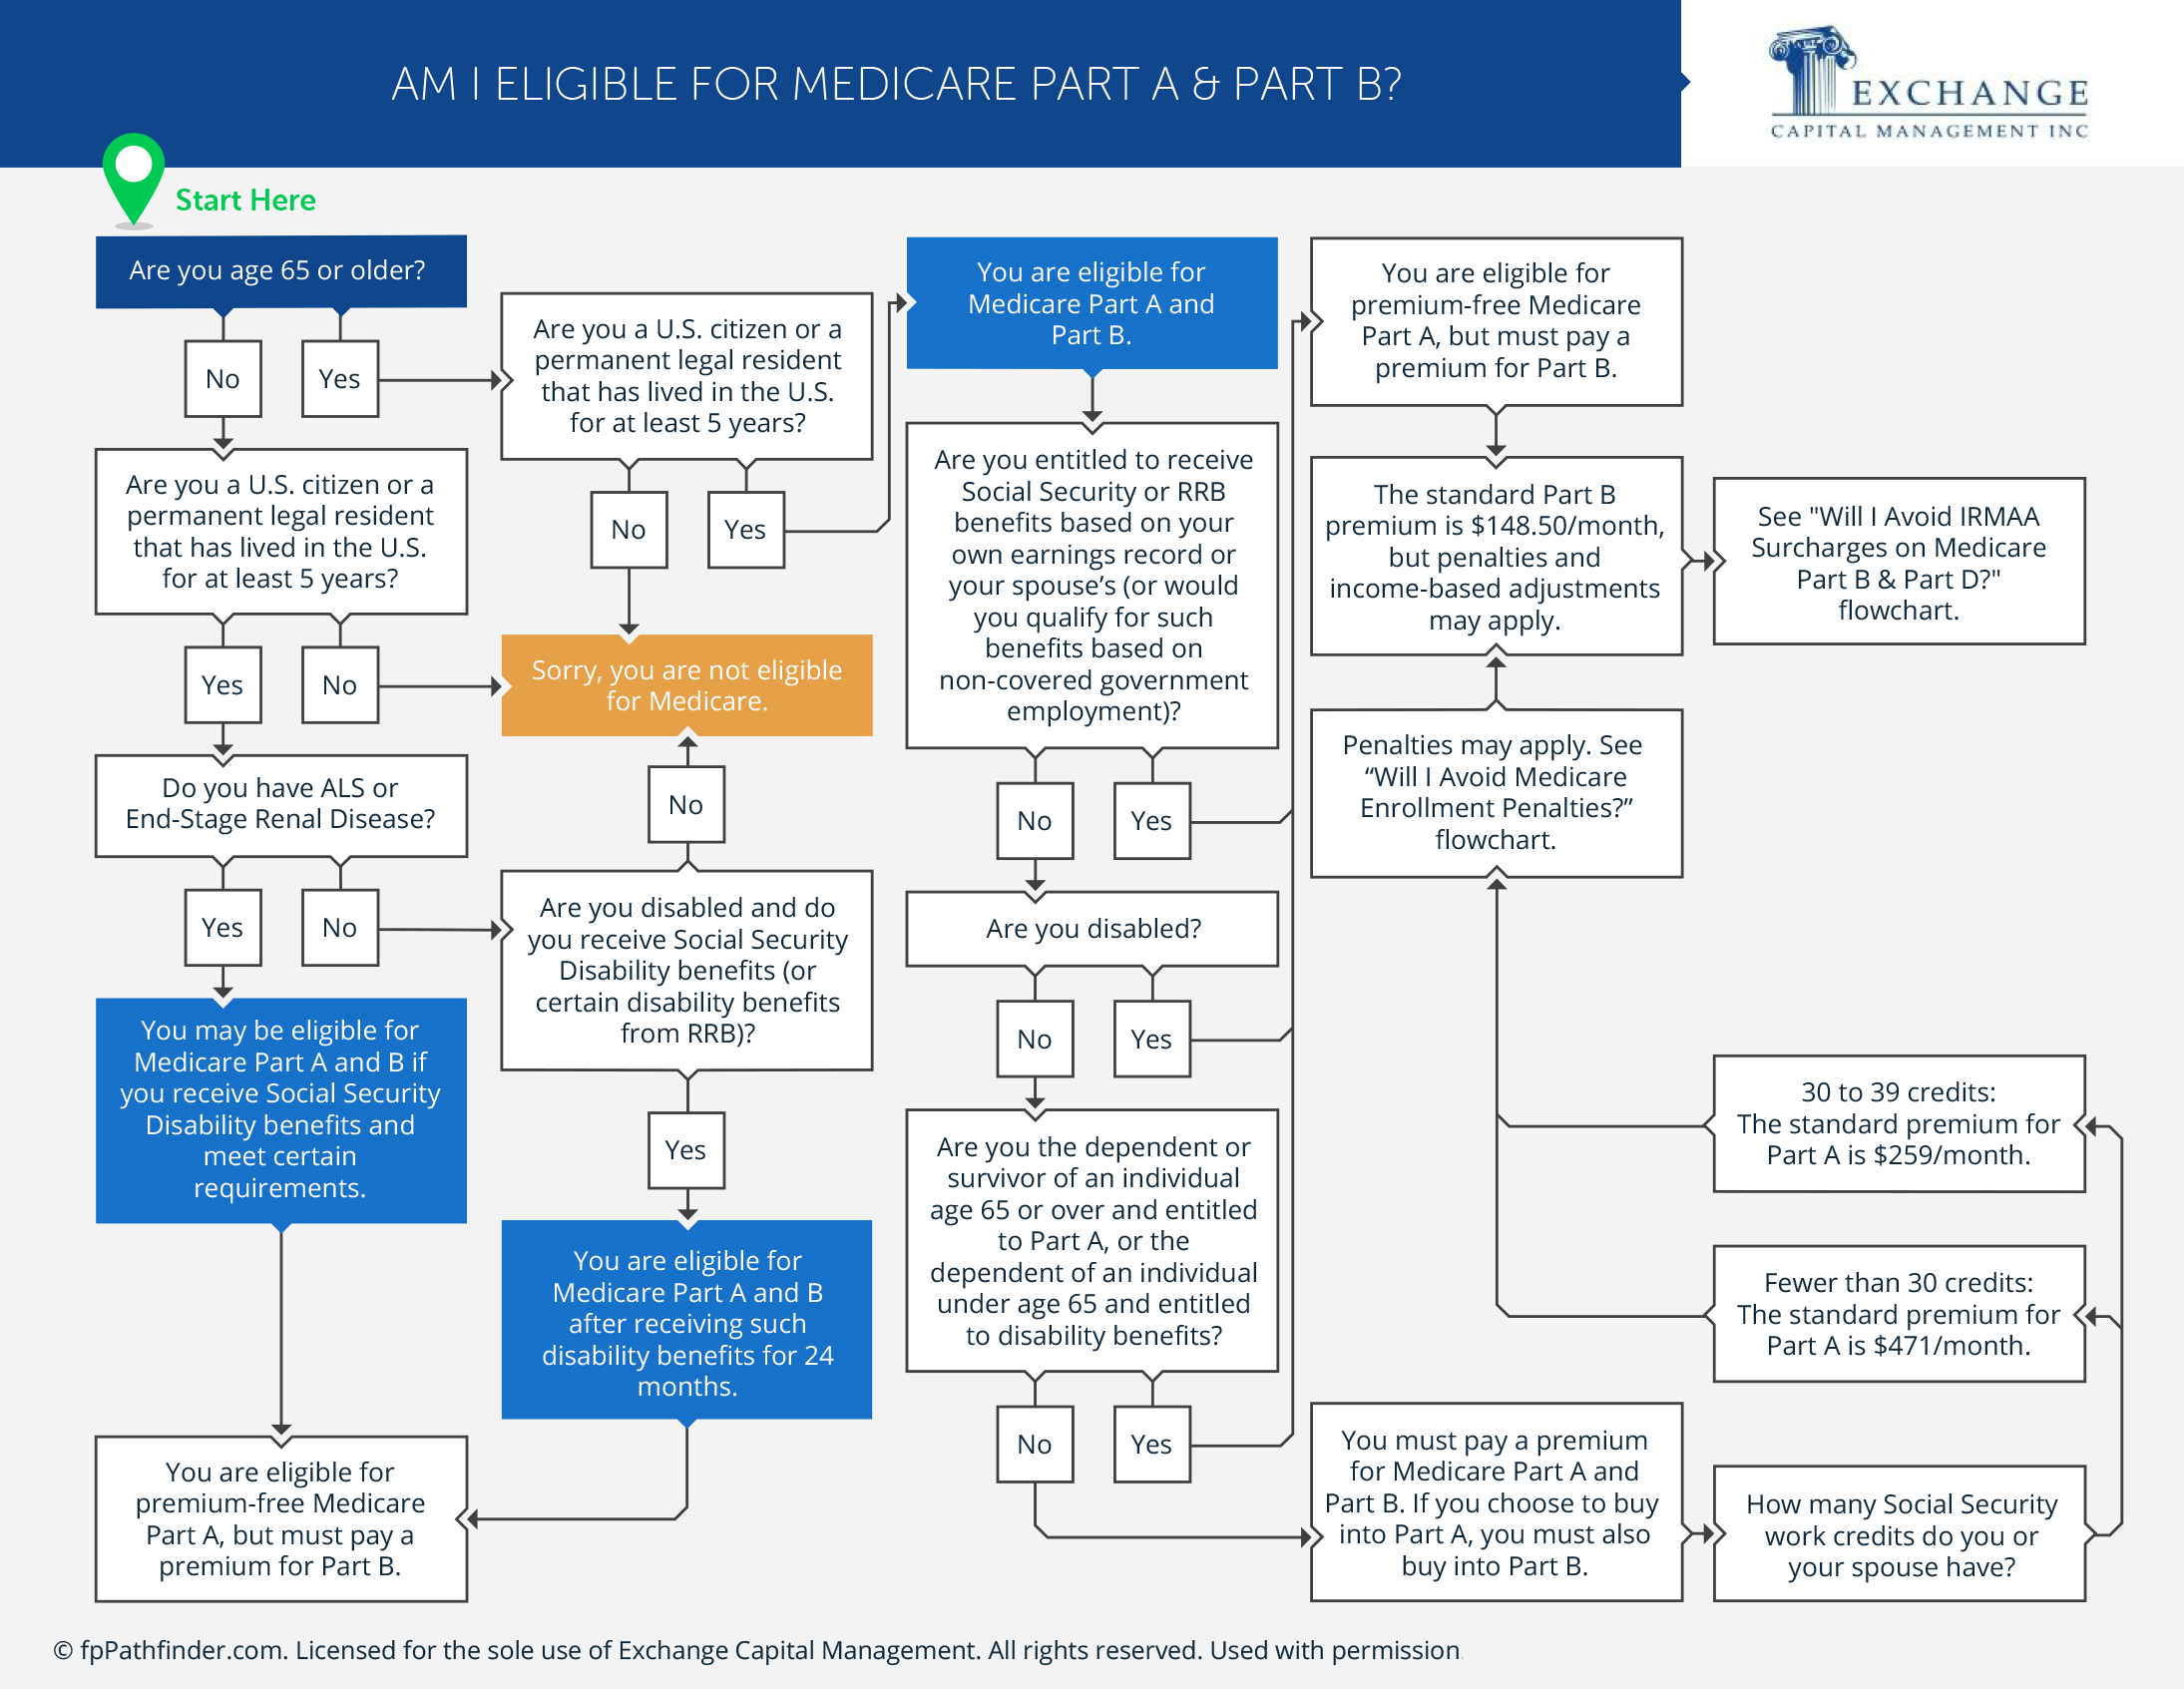 Am I Eligible for Medicare Part A & Part B?